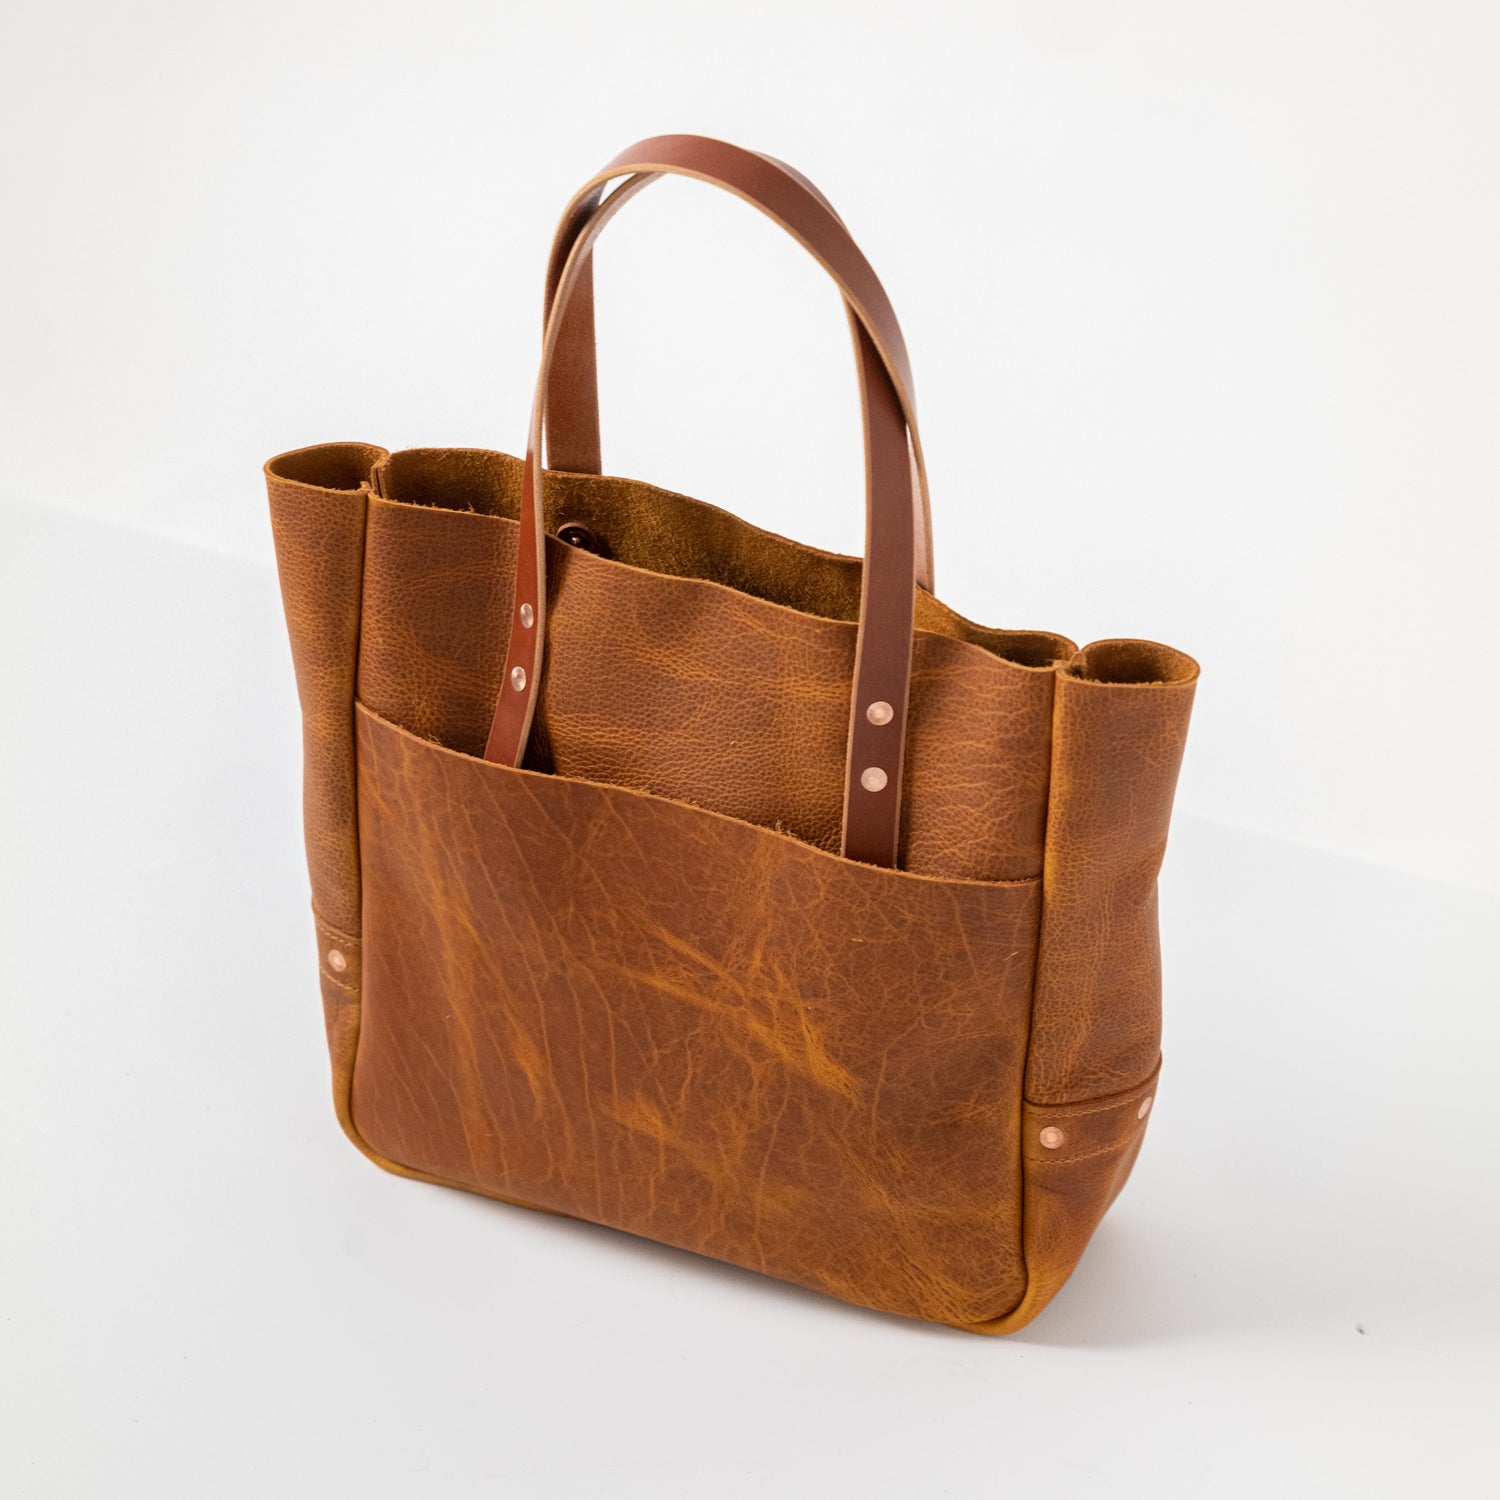 Honey Bison Carryall Tote